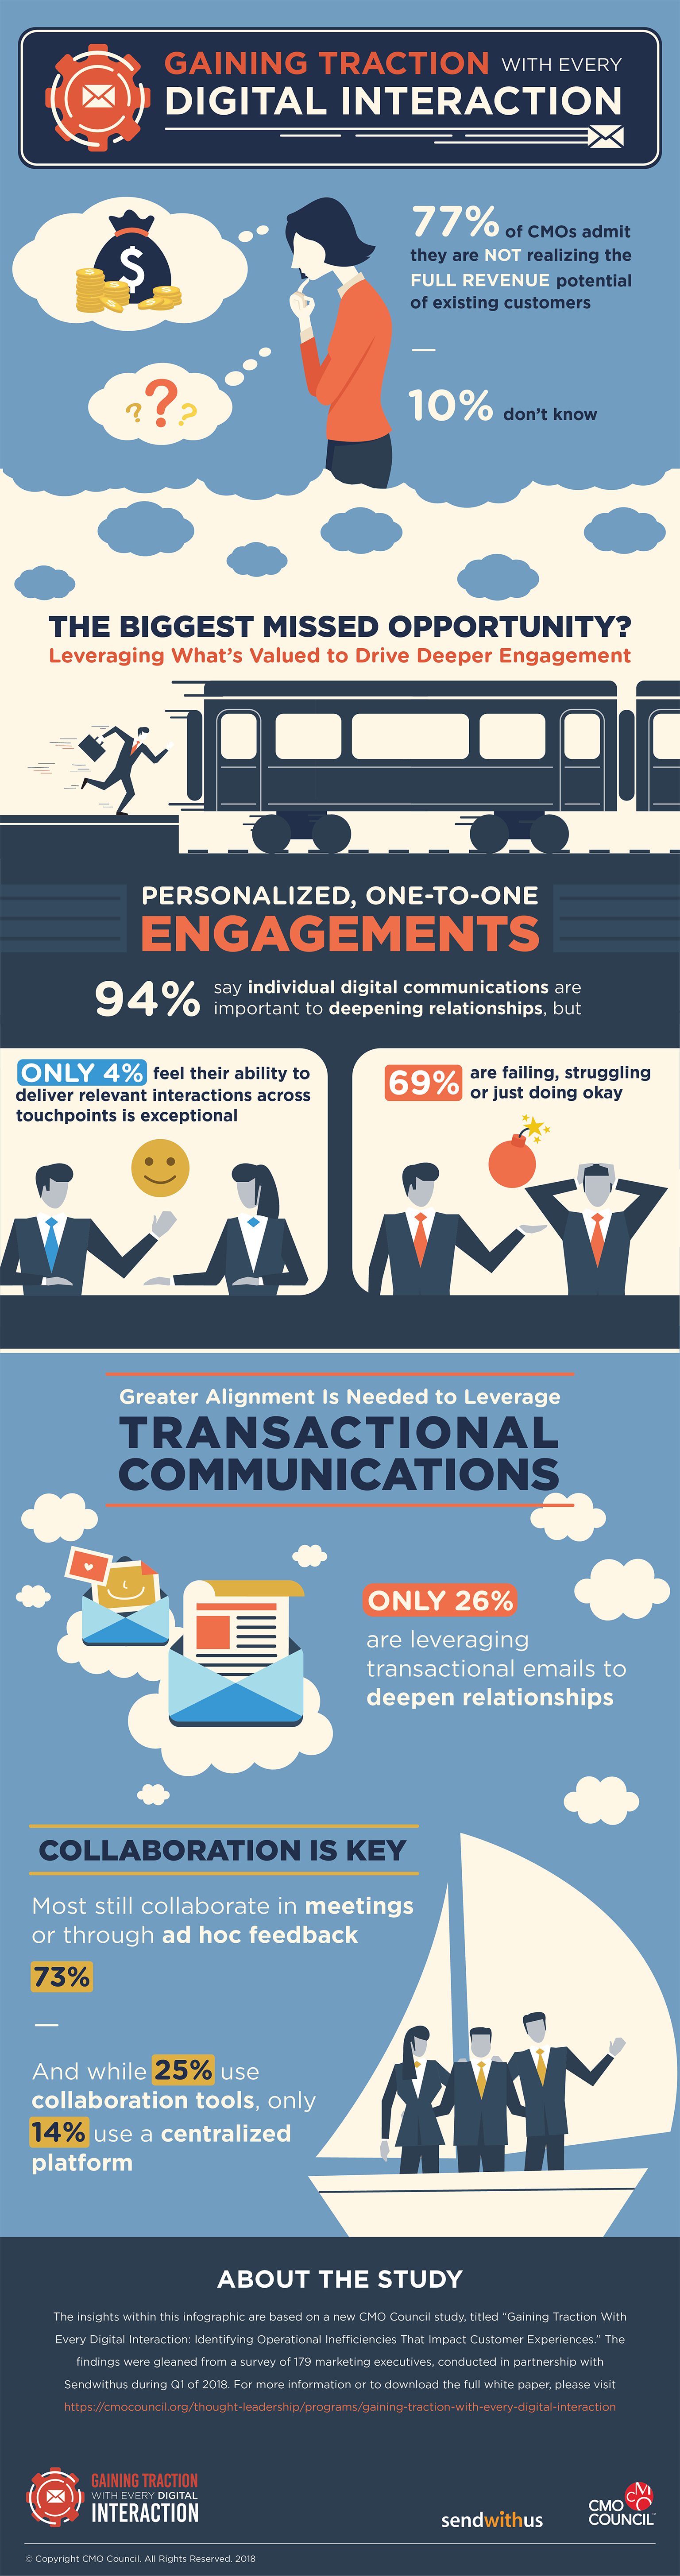 CMO Council Infographic